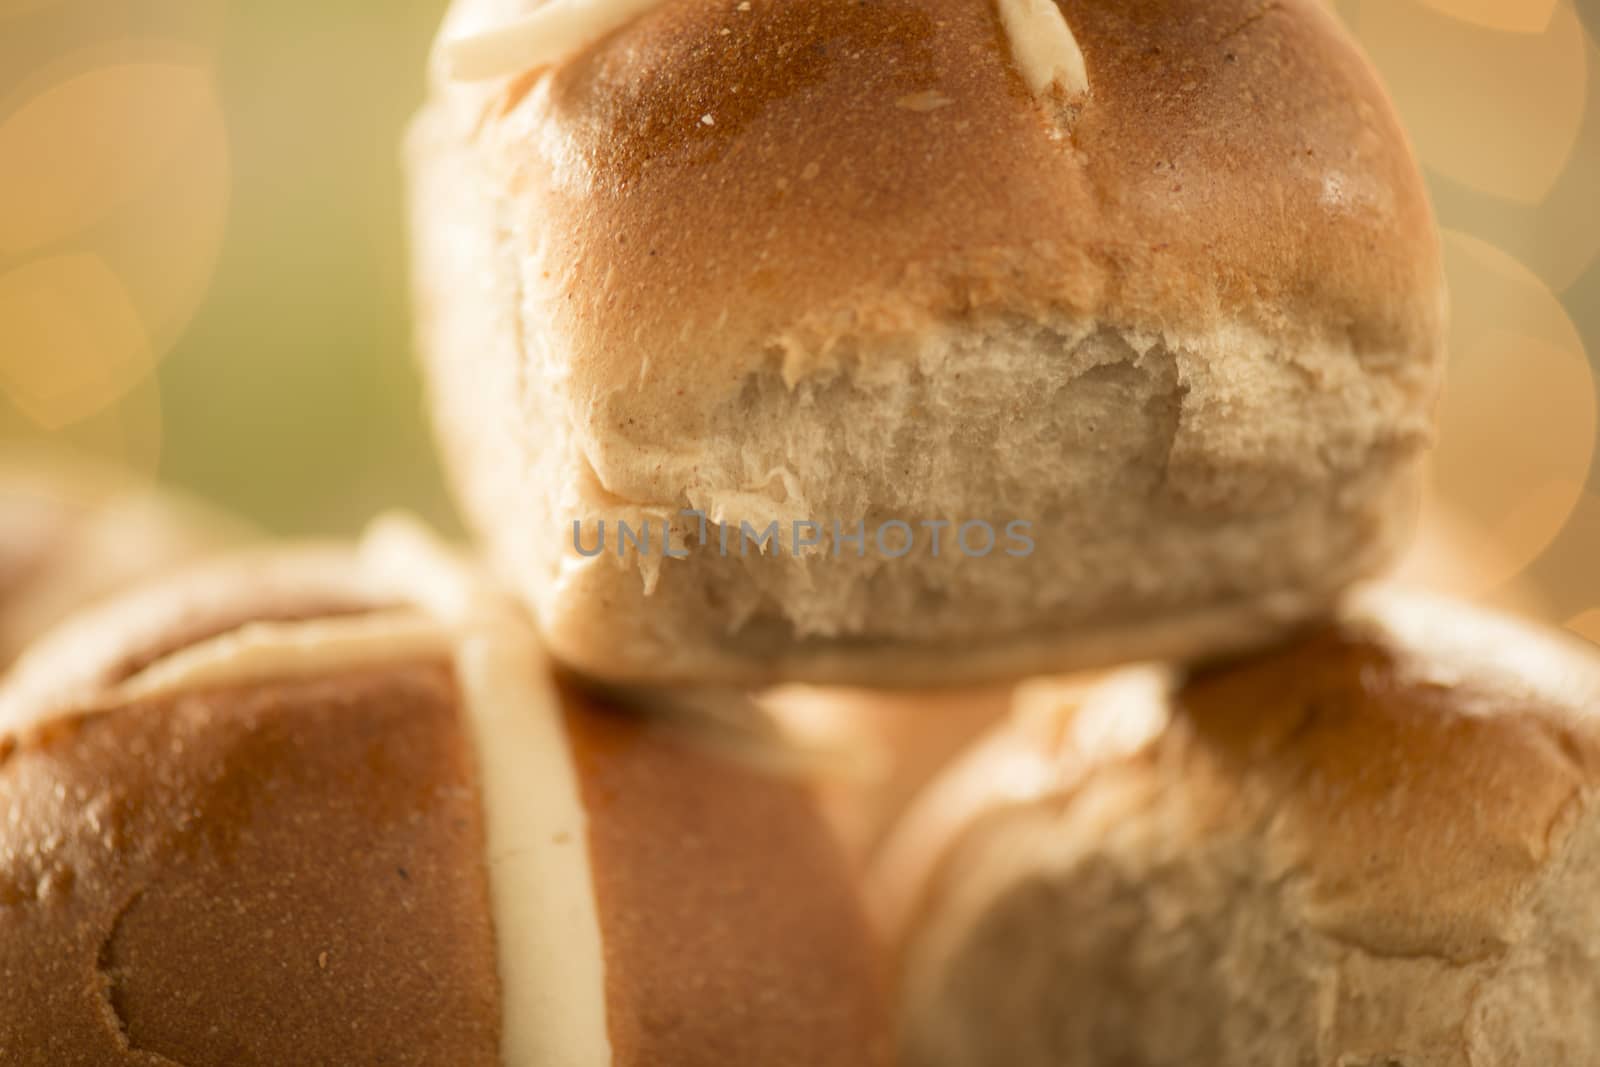 Tasty traditional Easter hot cross buns, closeup view.